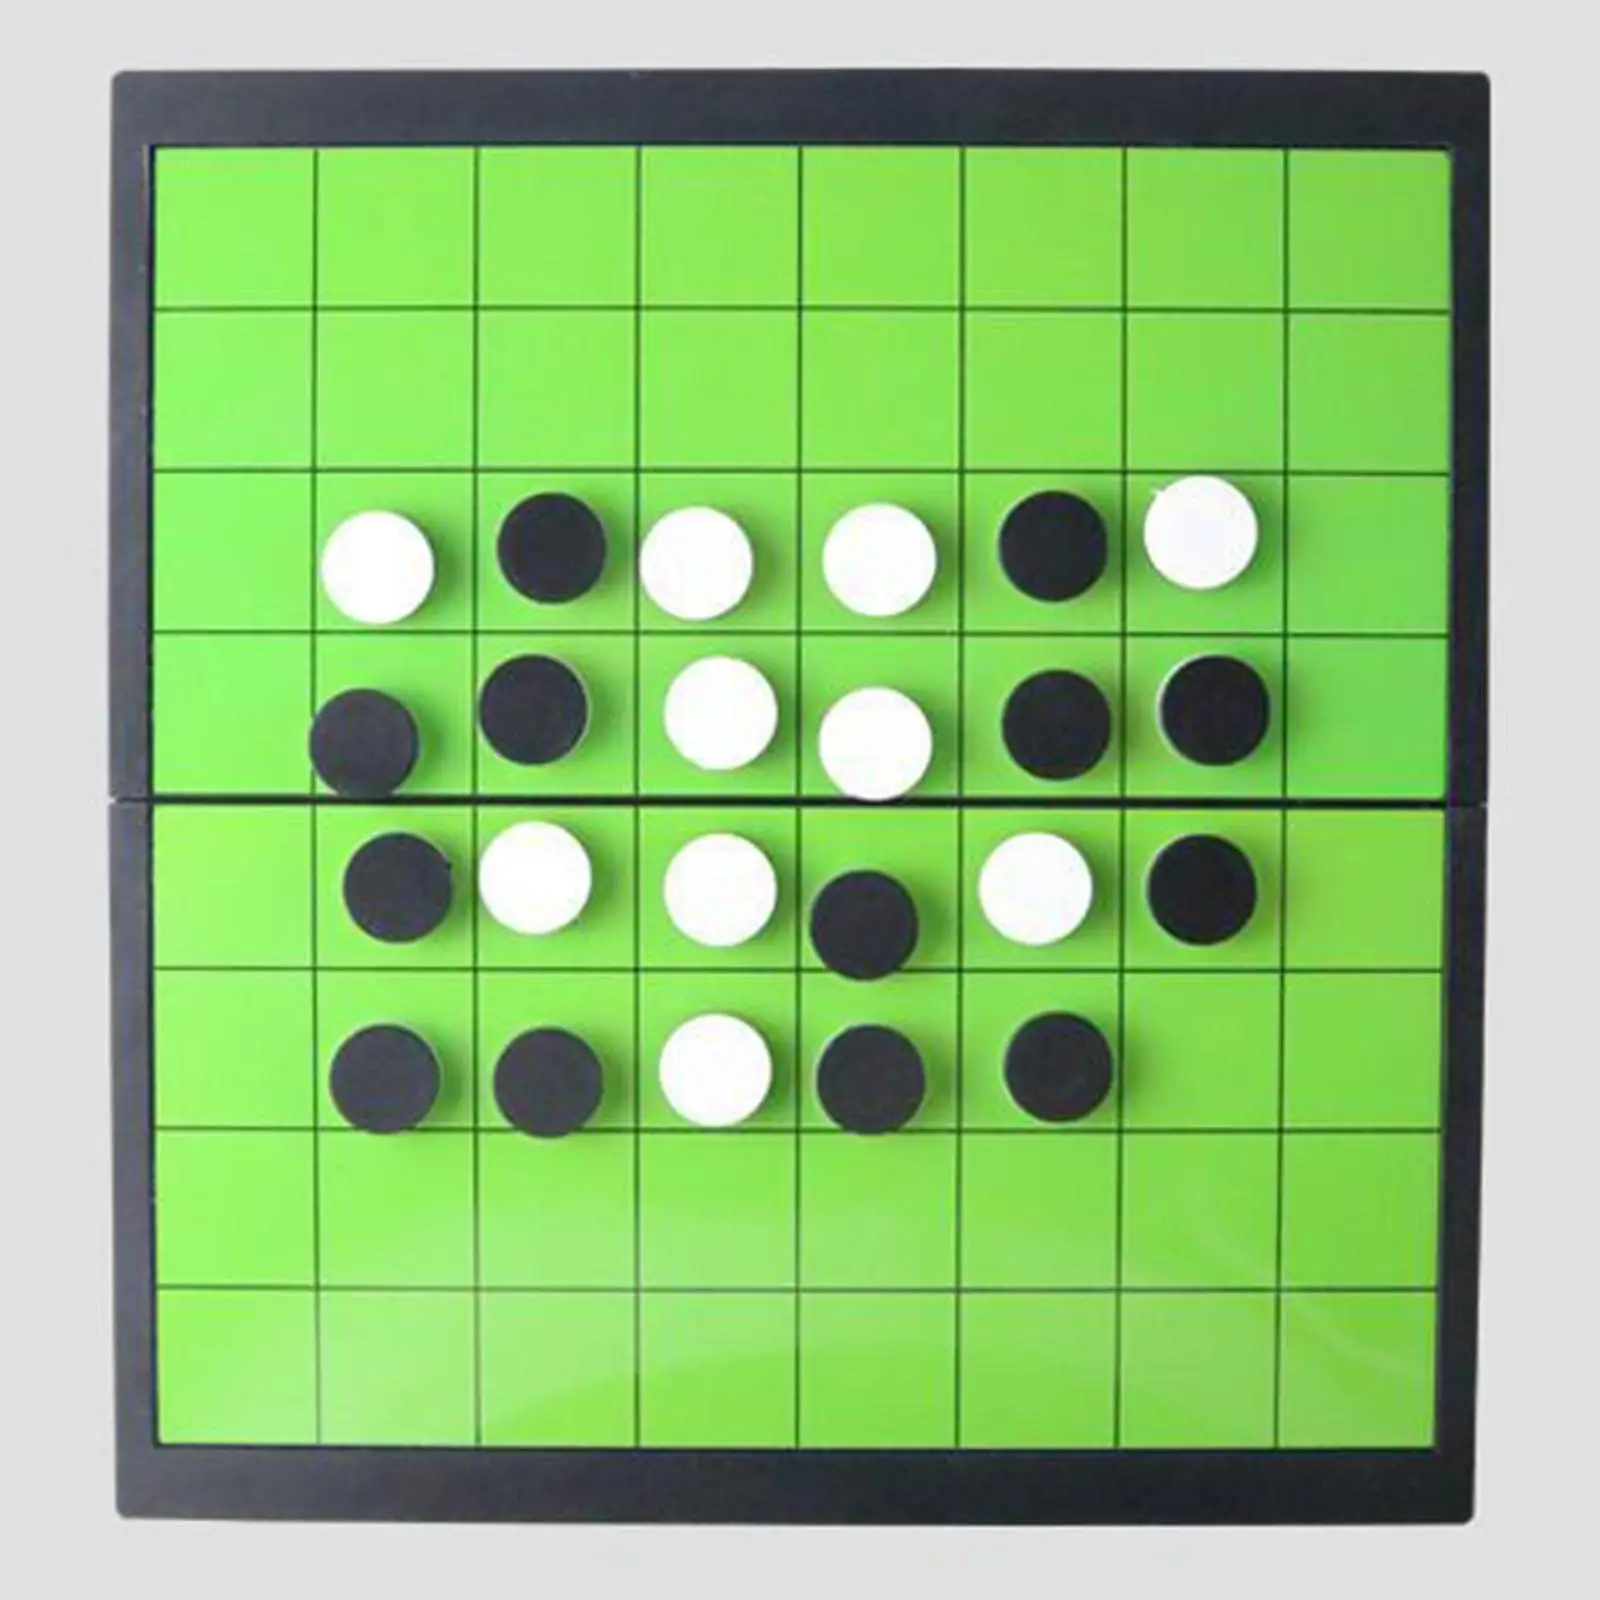 Reversi Chess Black and White Chess Board 64 Game Pieces for Adults